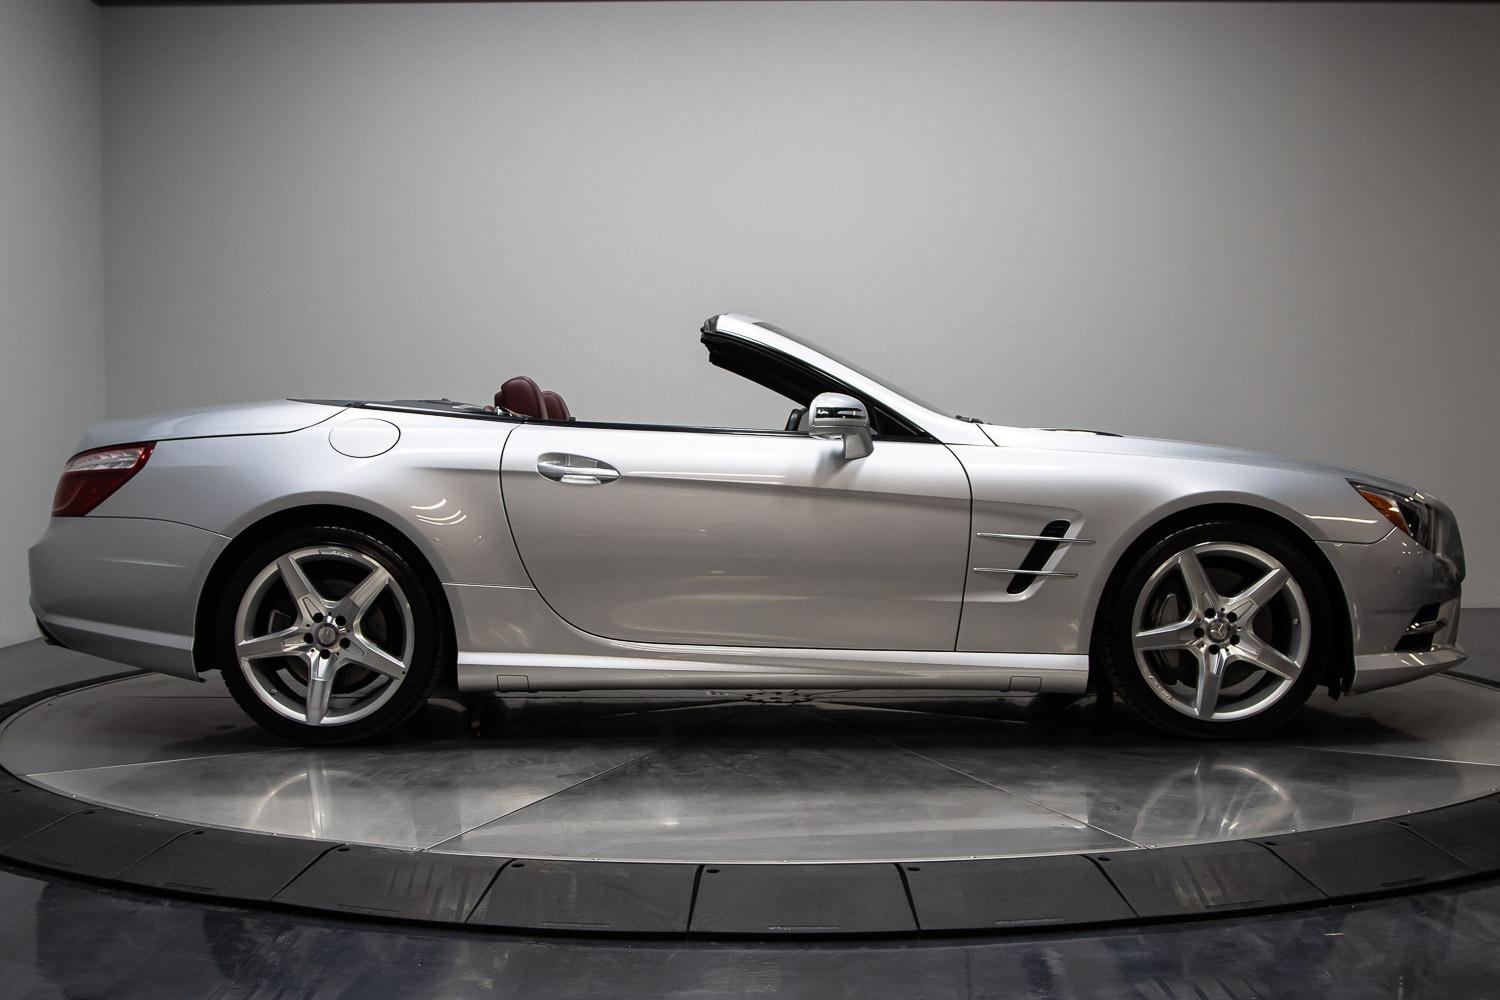 Used 2013 Mercedes Benz Sl Class Sl 550 For Sale 41995 Perfect Auto Collection Stock 005195